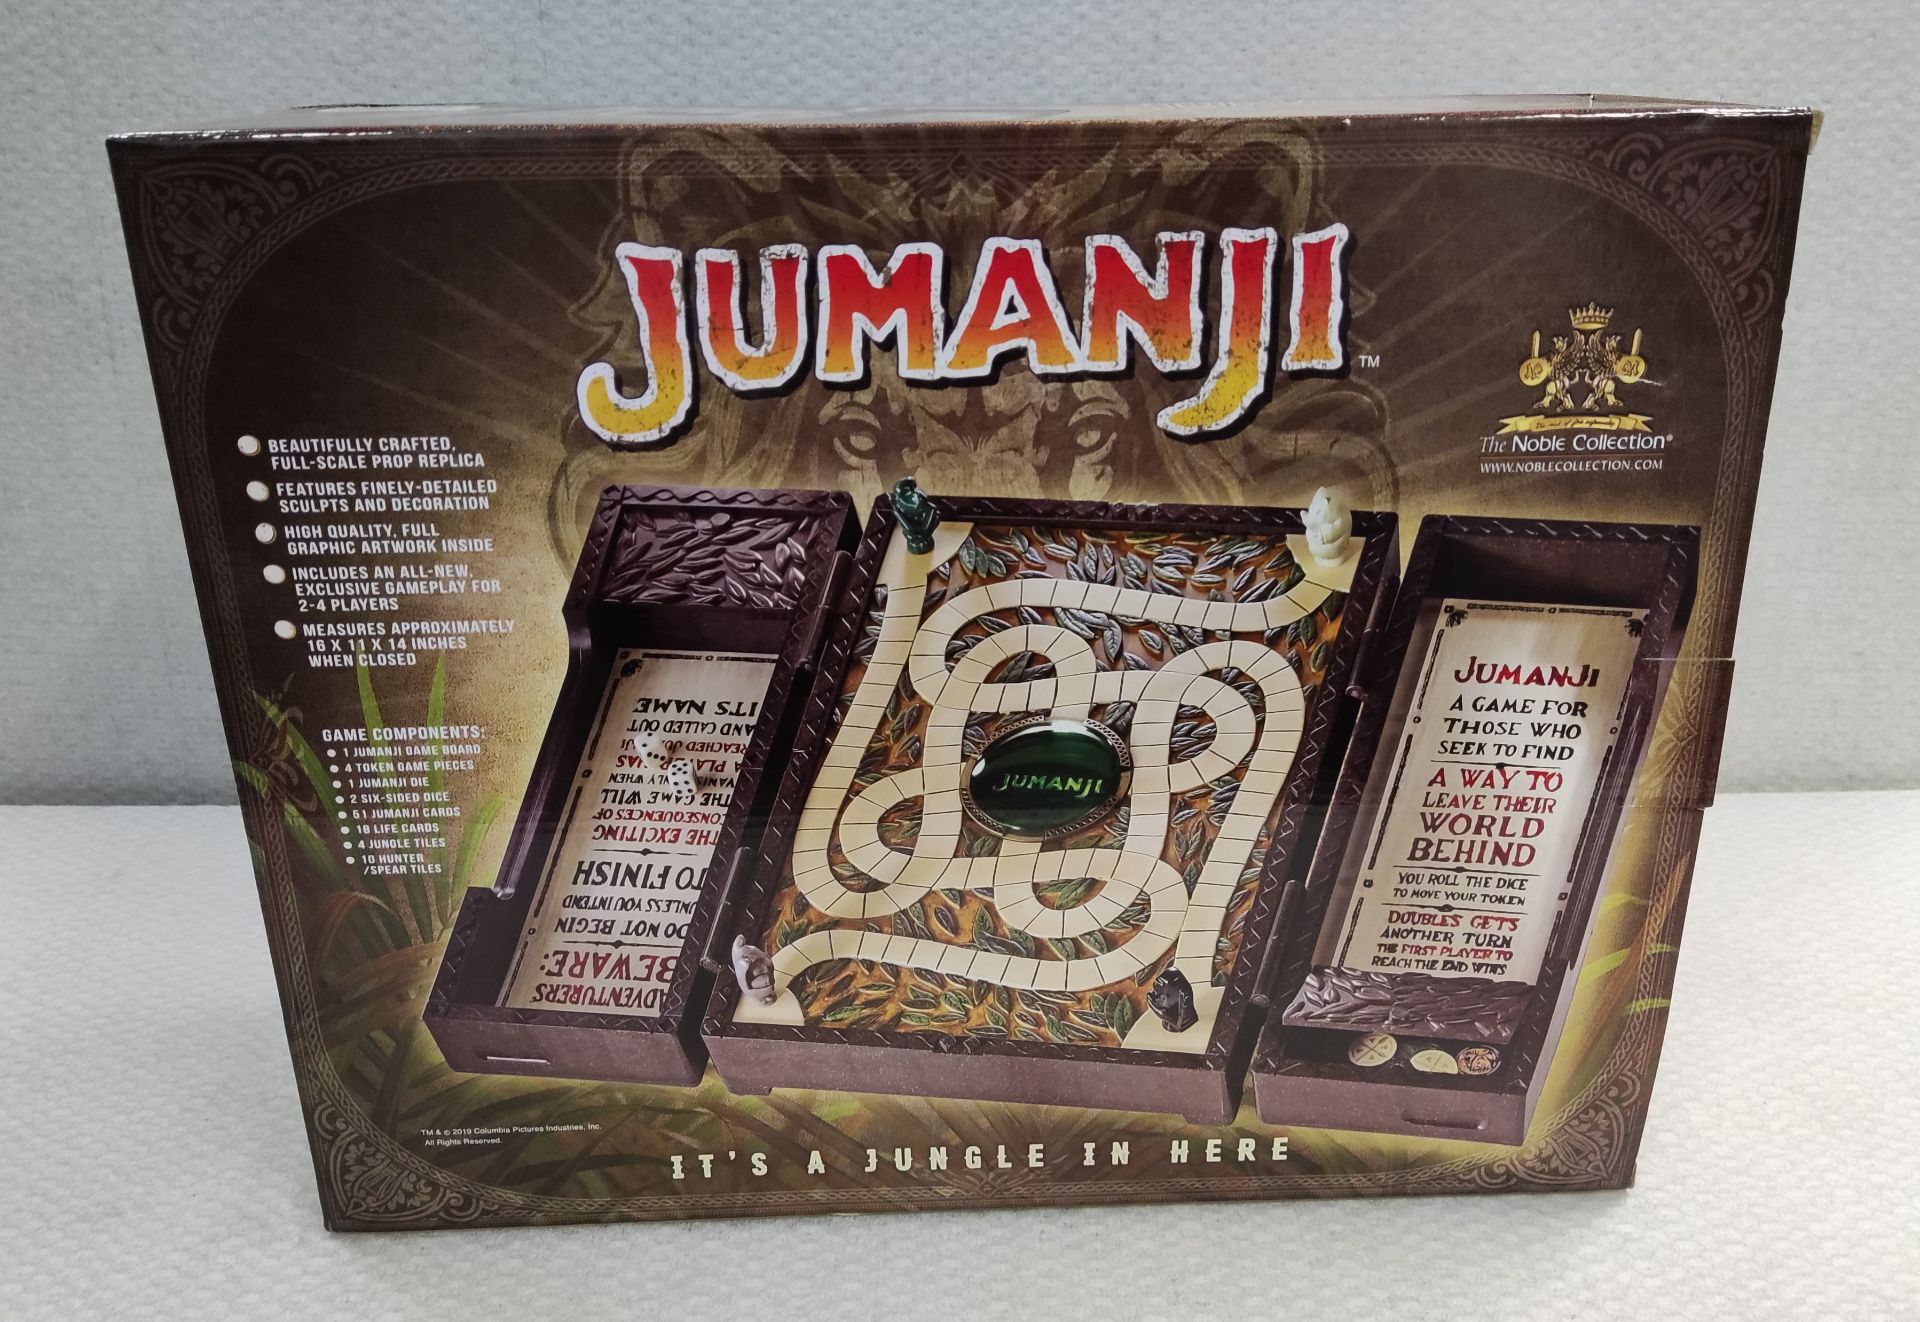 1 x Jumanji Board Game From the Noble Collection - New/Boxed - Image 3 of 8